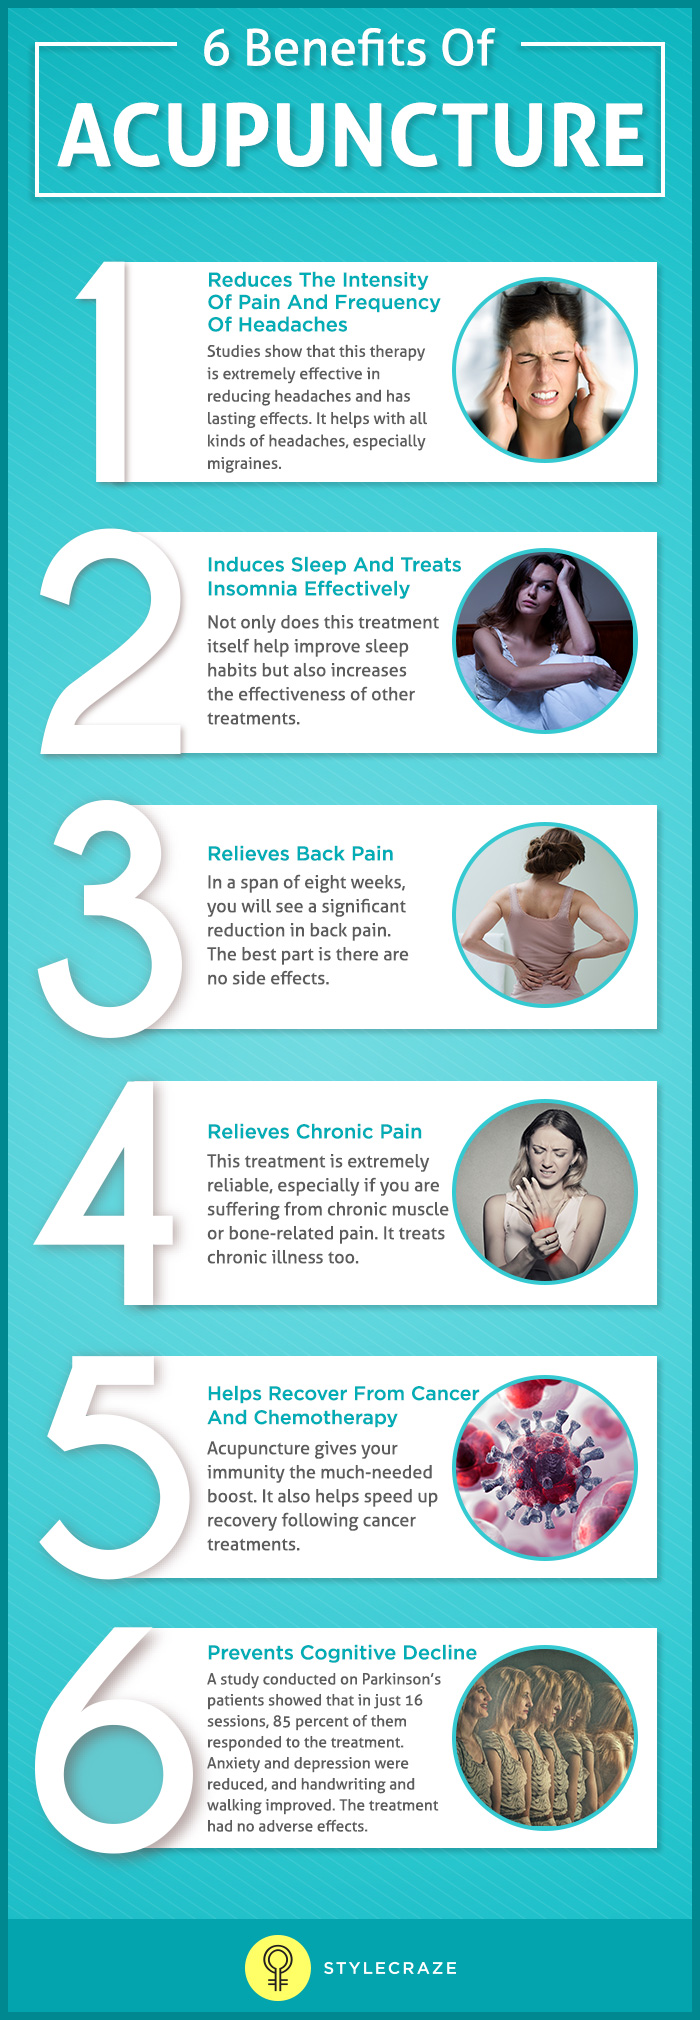 6-Benefits-Of-Acupuncture (2)